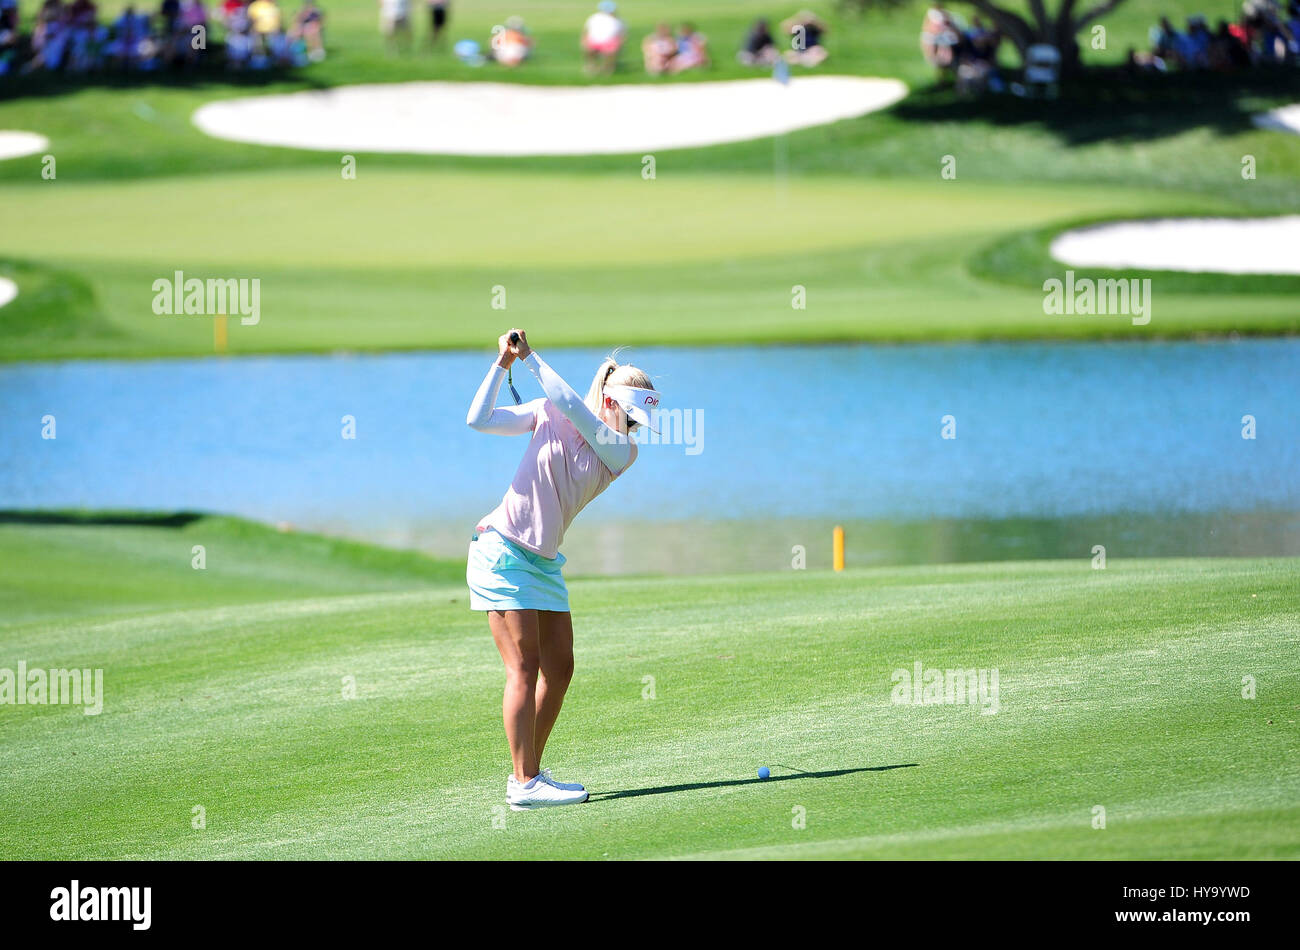 Rancho Mirage, California, USA. 2nd Apr, 2017. Charley Hull on the 6th hole during the final round of the ANA Inspiration at the Dinah Shore Tournament Course at Mission Hills Country Club in Rancho Mirage, California. John Green/CSM/Alamy Live News Stock Photo